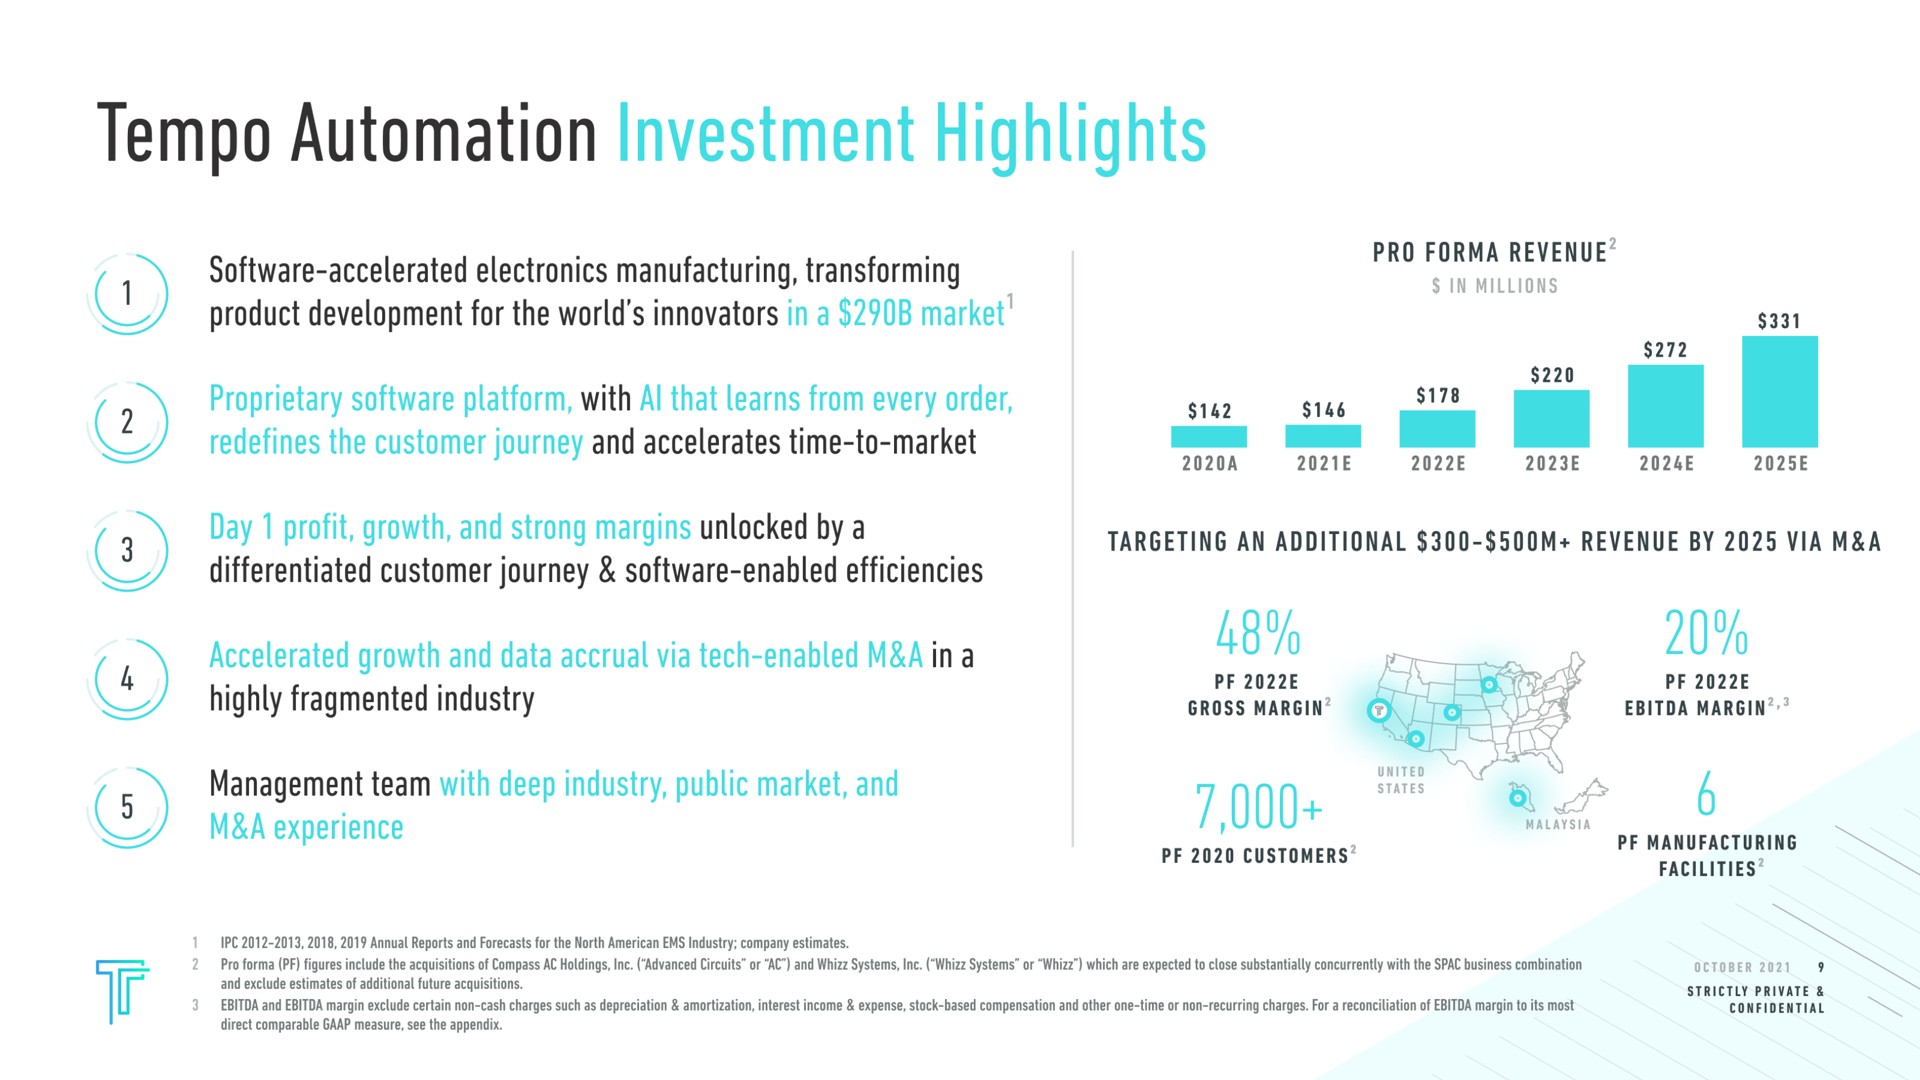 tempo investment highlights accelerated electronics manufacturing transforming product development for the world innovators in a market pro revenue in millions proprietary platform with that learns from every order redefines the customer journey and accelerates time to market he a day profit growth and strong margins unlocked by a differentiated customer journey enabled efficiencies accelerated growth and data accrual via tech enabled a highly fragmented industry management team with deep industry public market and a experience targeting an additional revenue by via a facilities | Tempo